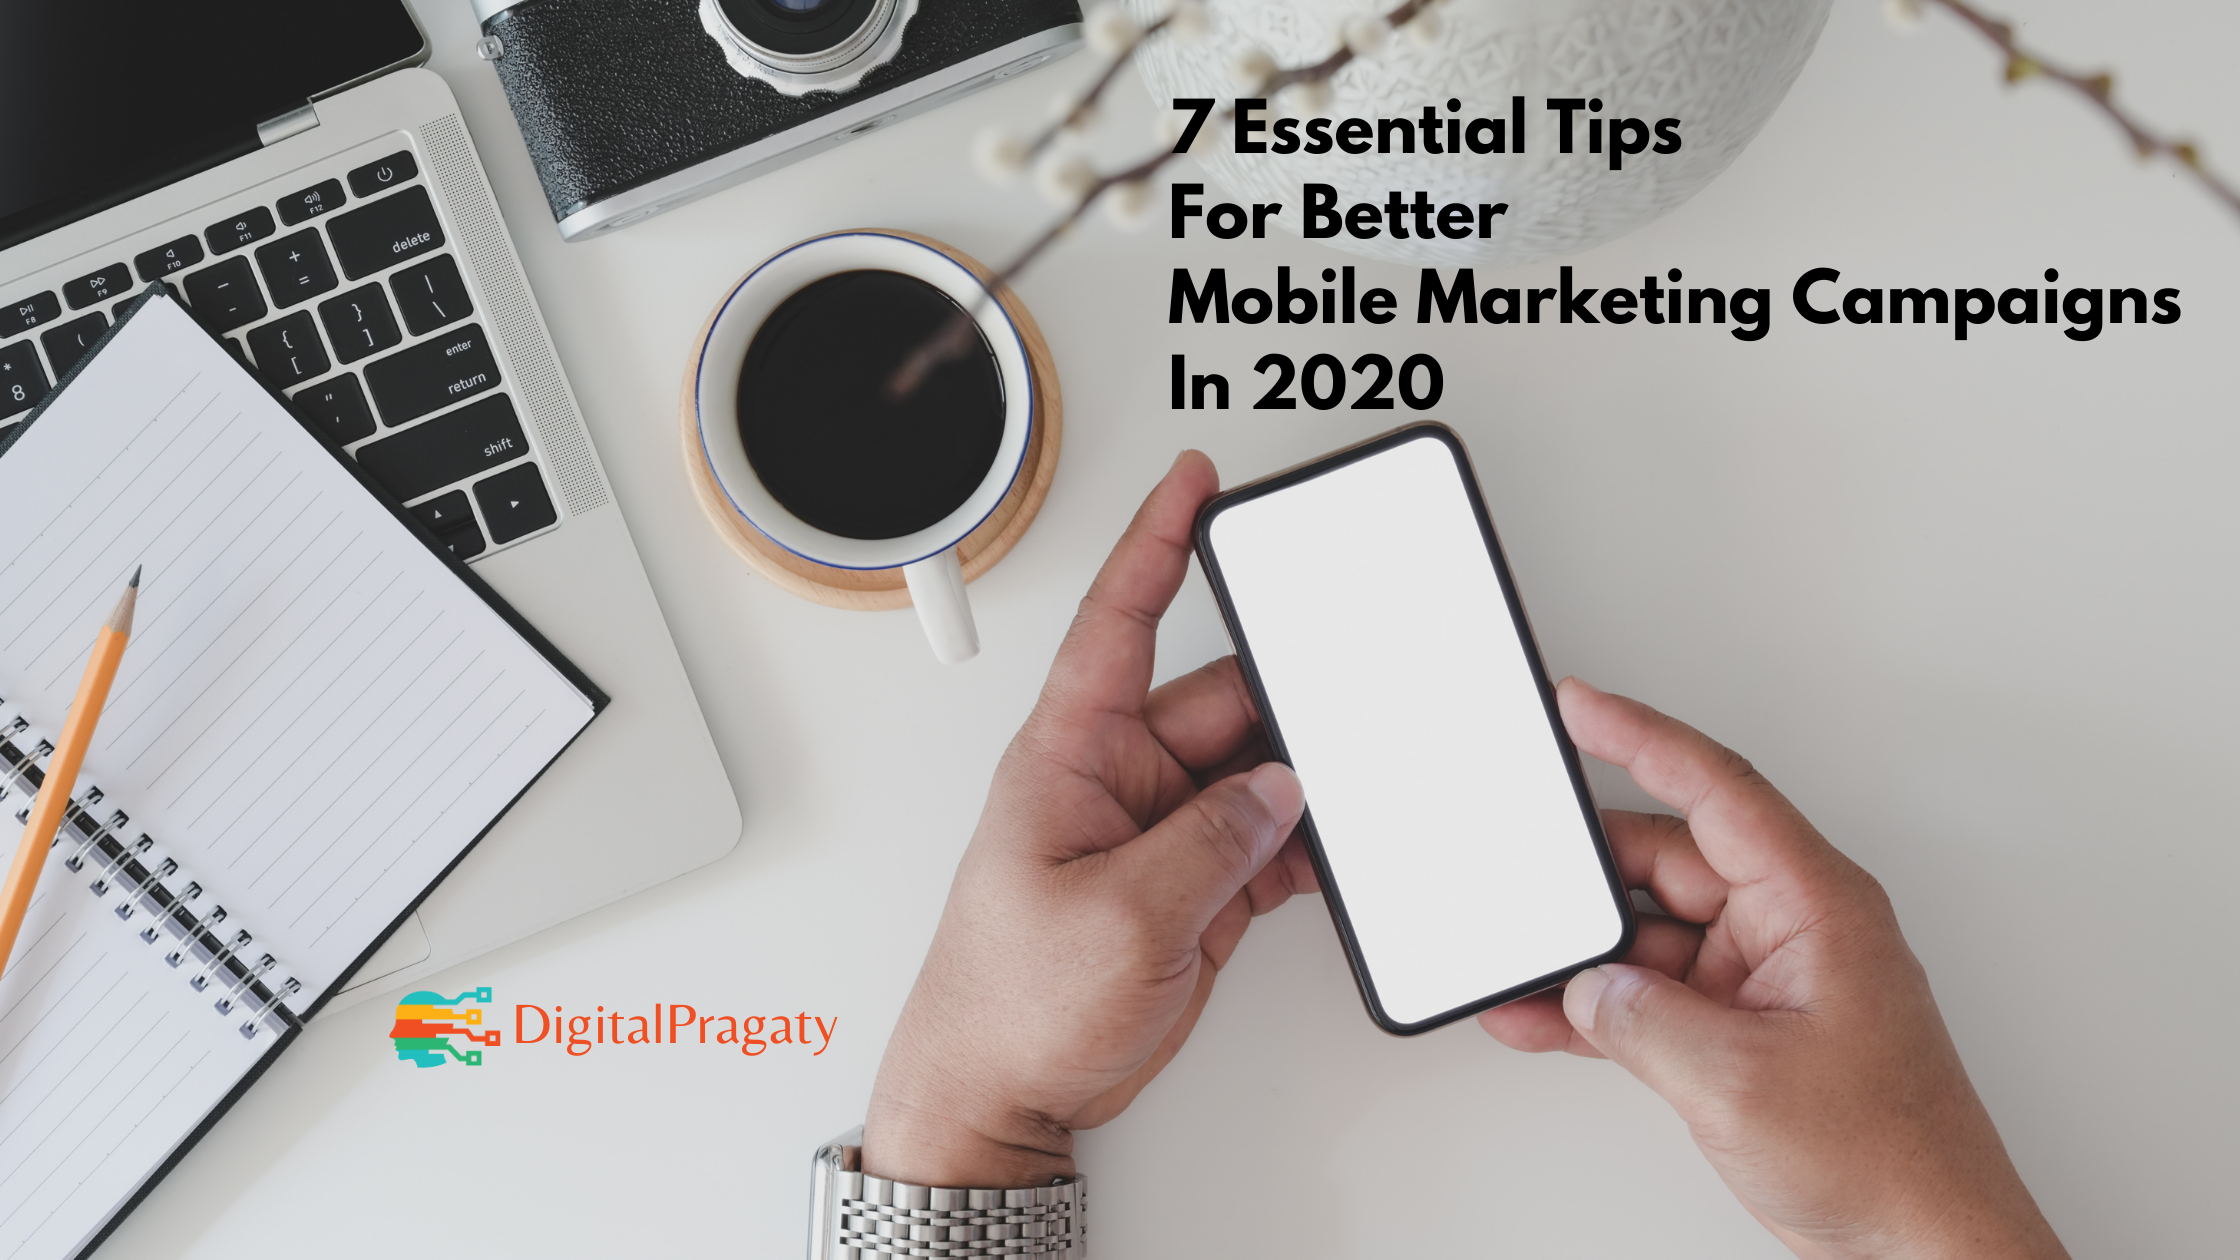 7 Essential Tips for Better Mobile Marketing Campaigns in 2020